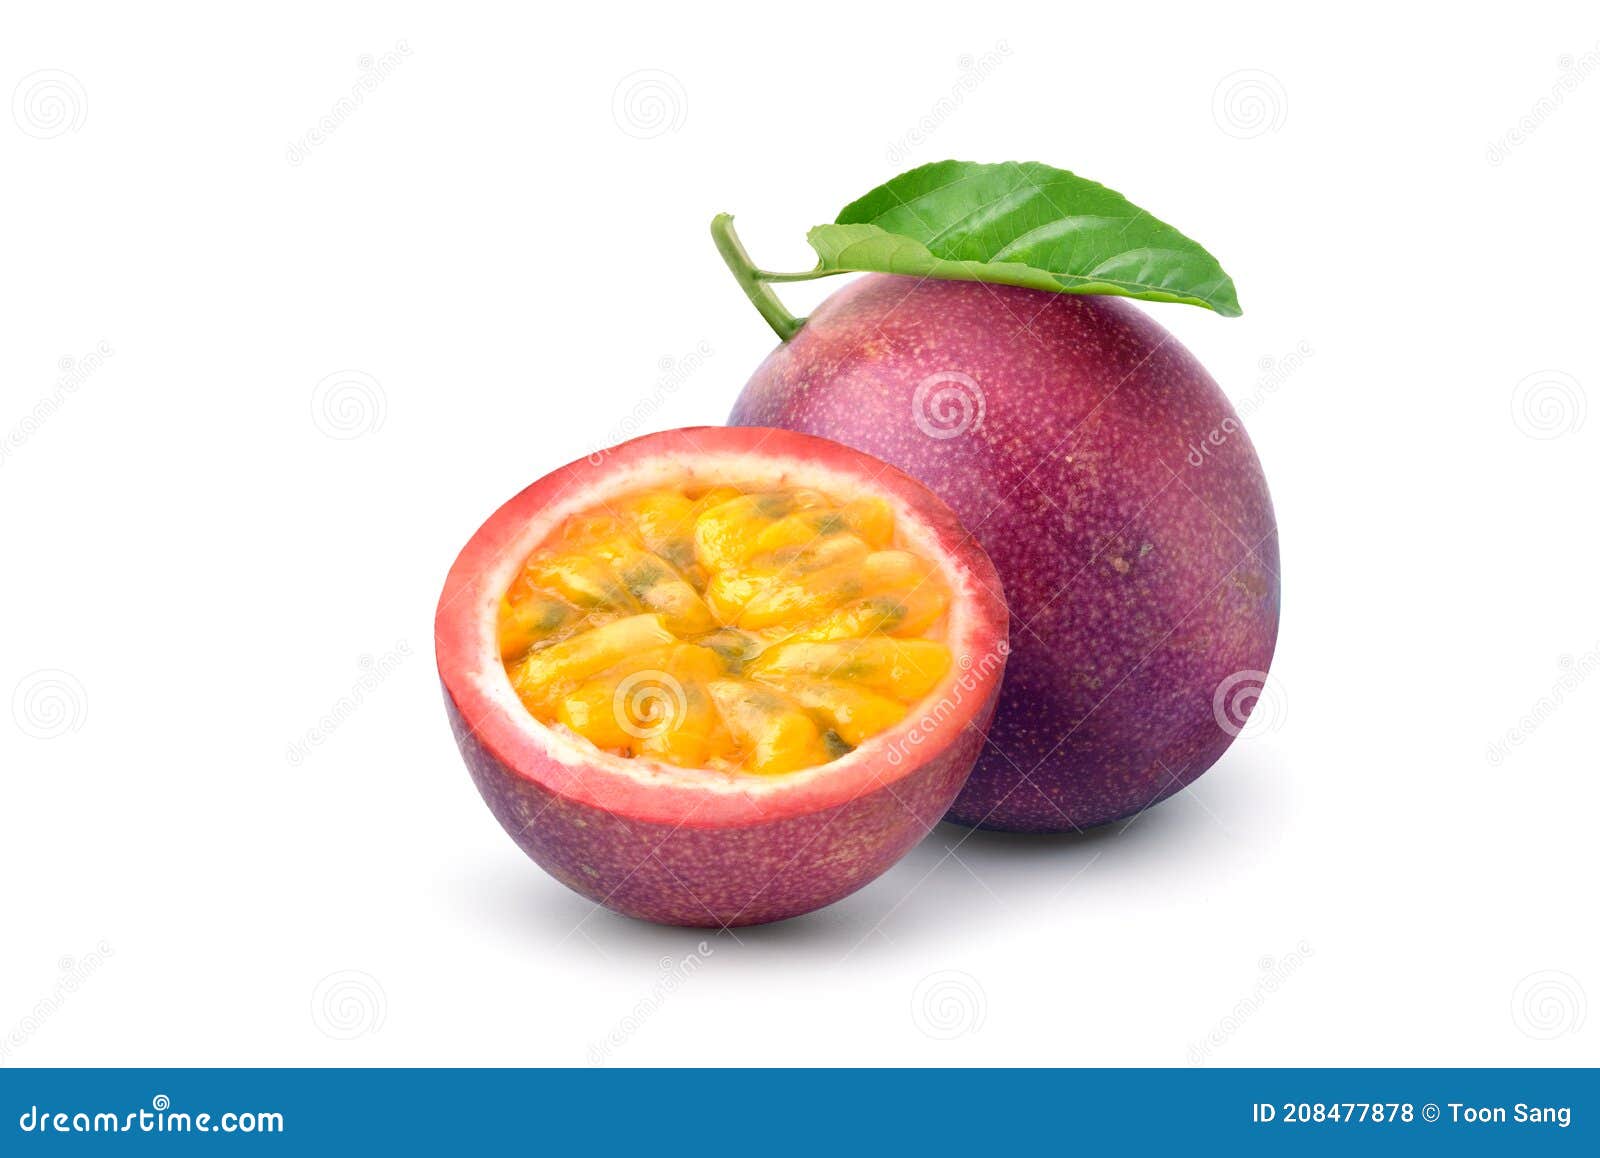 purple passion fruit with cut in half